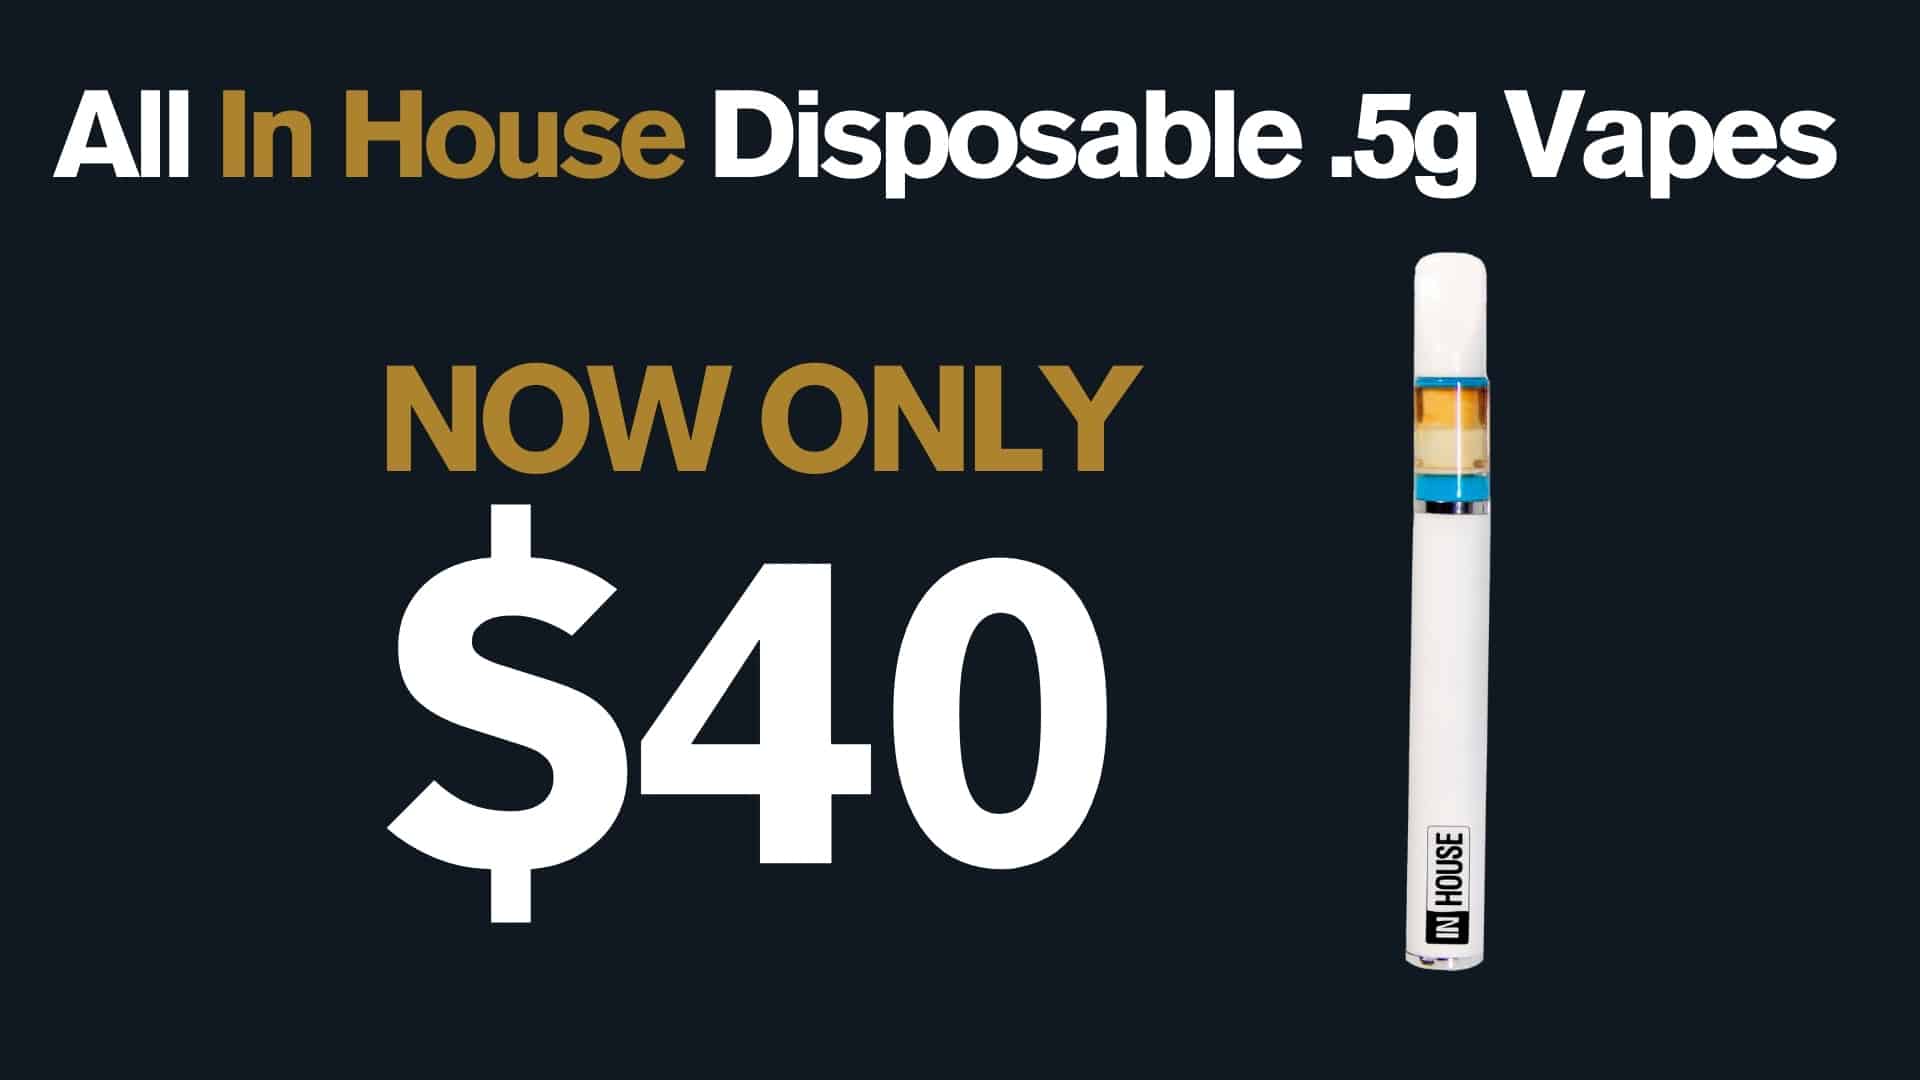 .5g In House Disposable Vapes Now Only $40